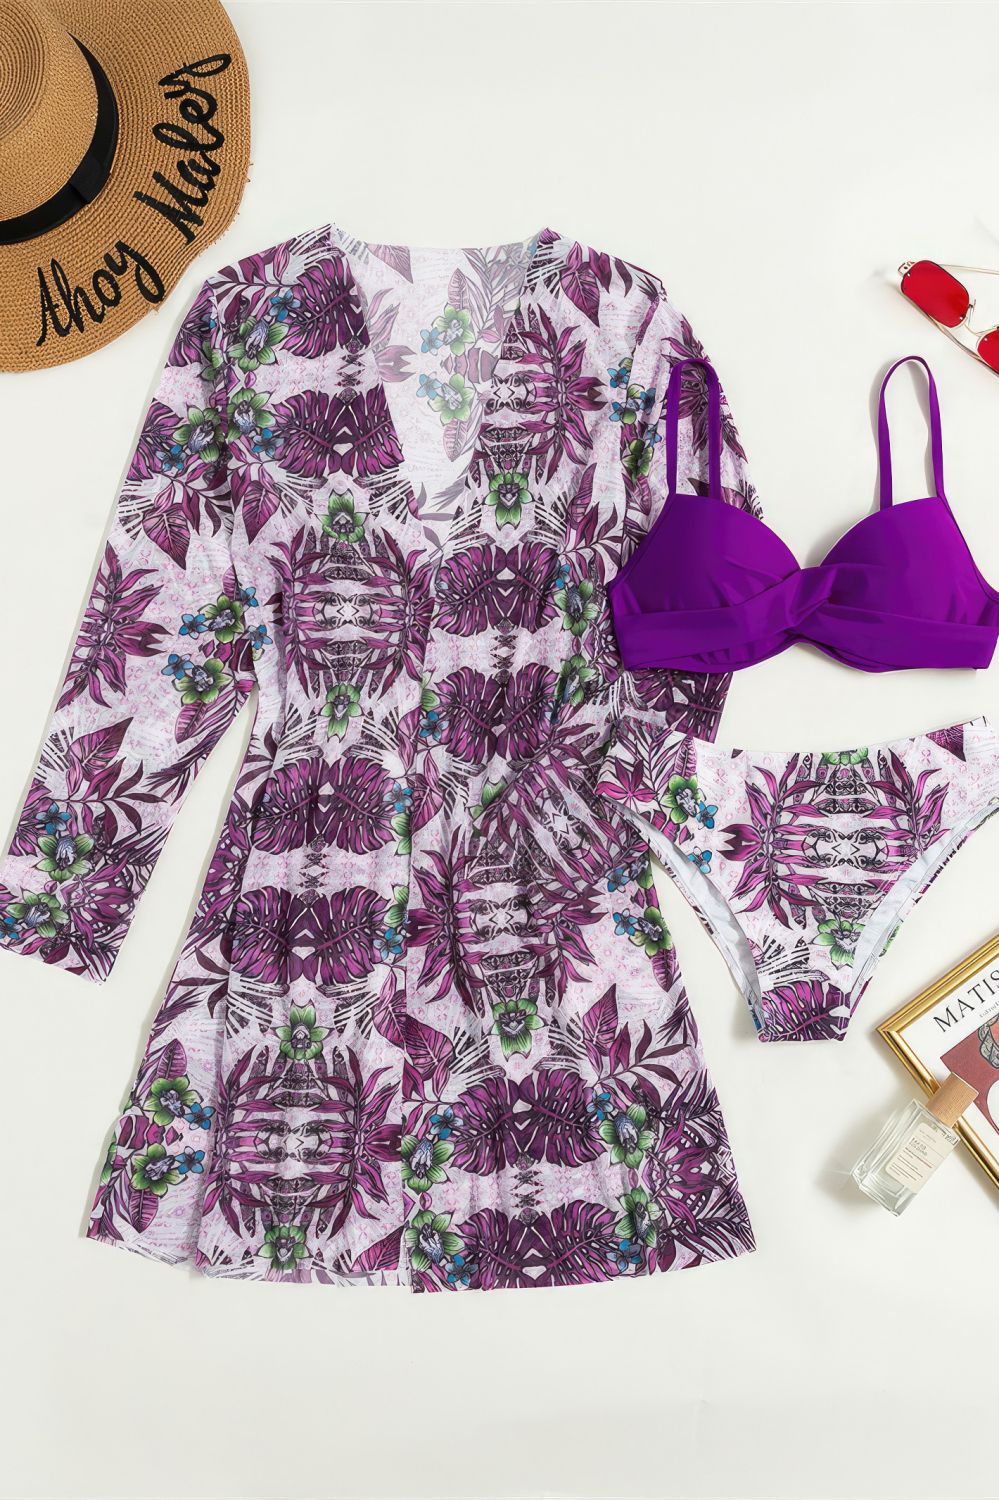 Purple-Floral-Print-Low-Waist-With-Cover-Up-Three-Pieces-Bikini-Set